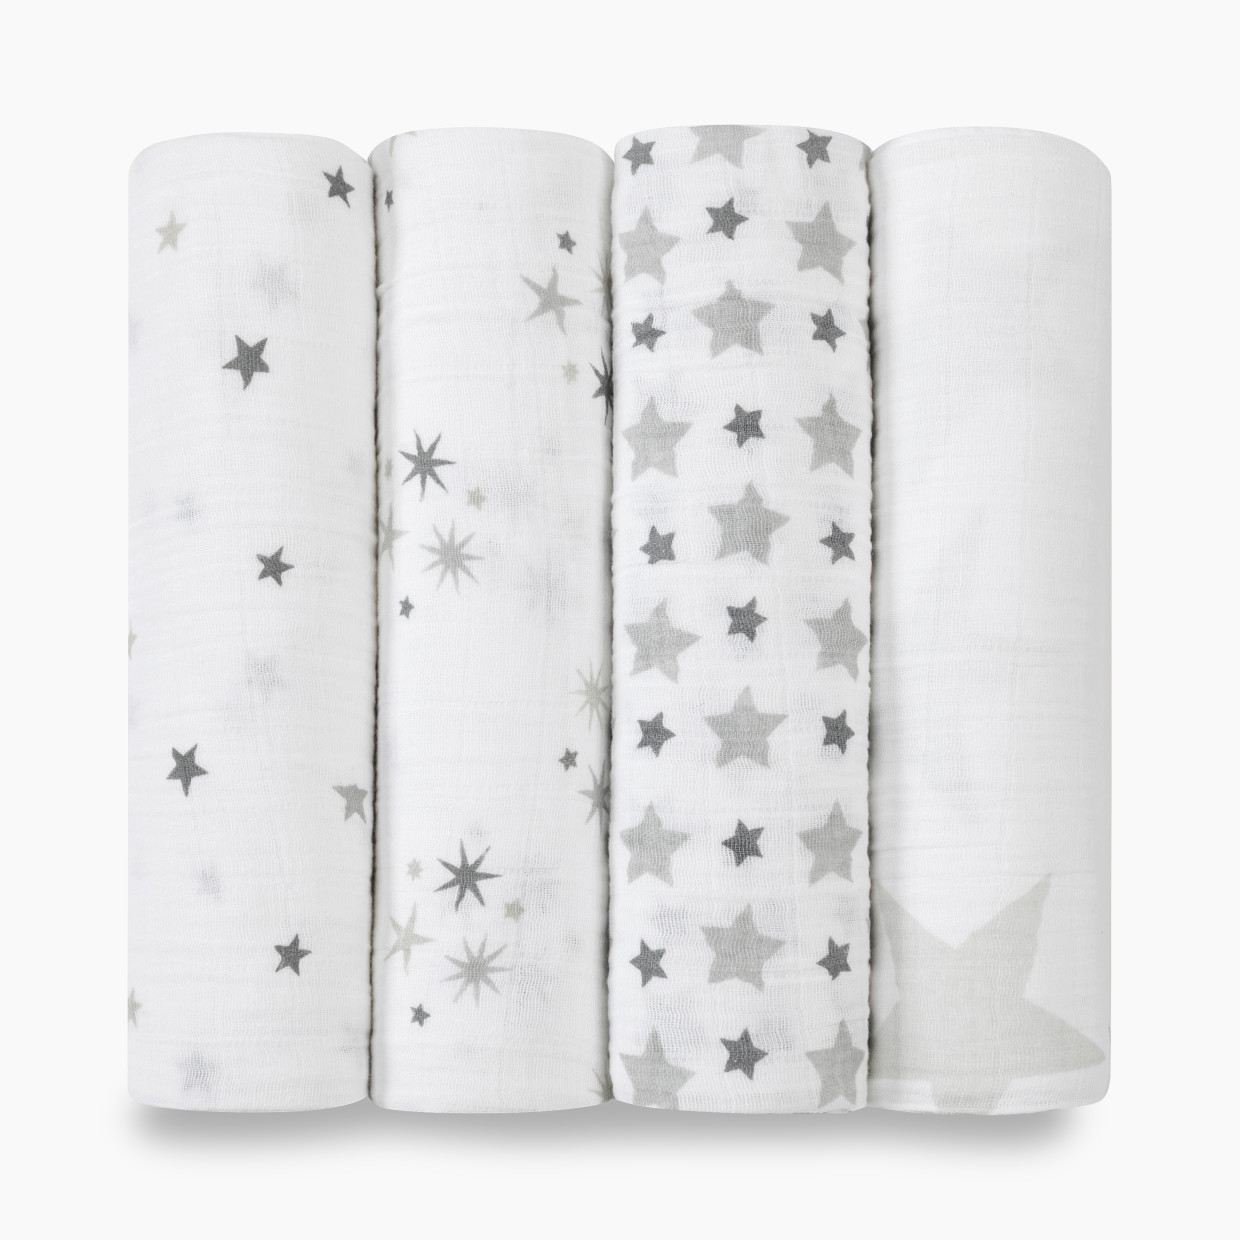 Aden + Anais Cotton Muslin Swaddle 4-Pack - Twinkle-Discontinued.